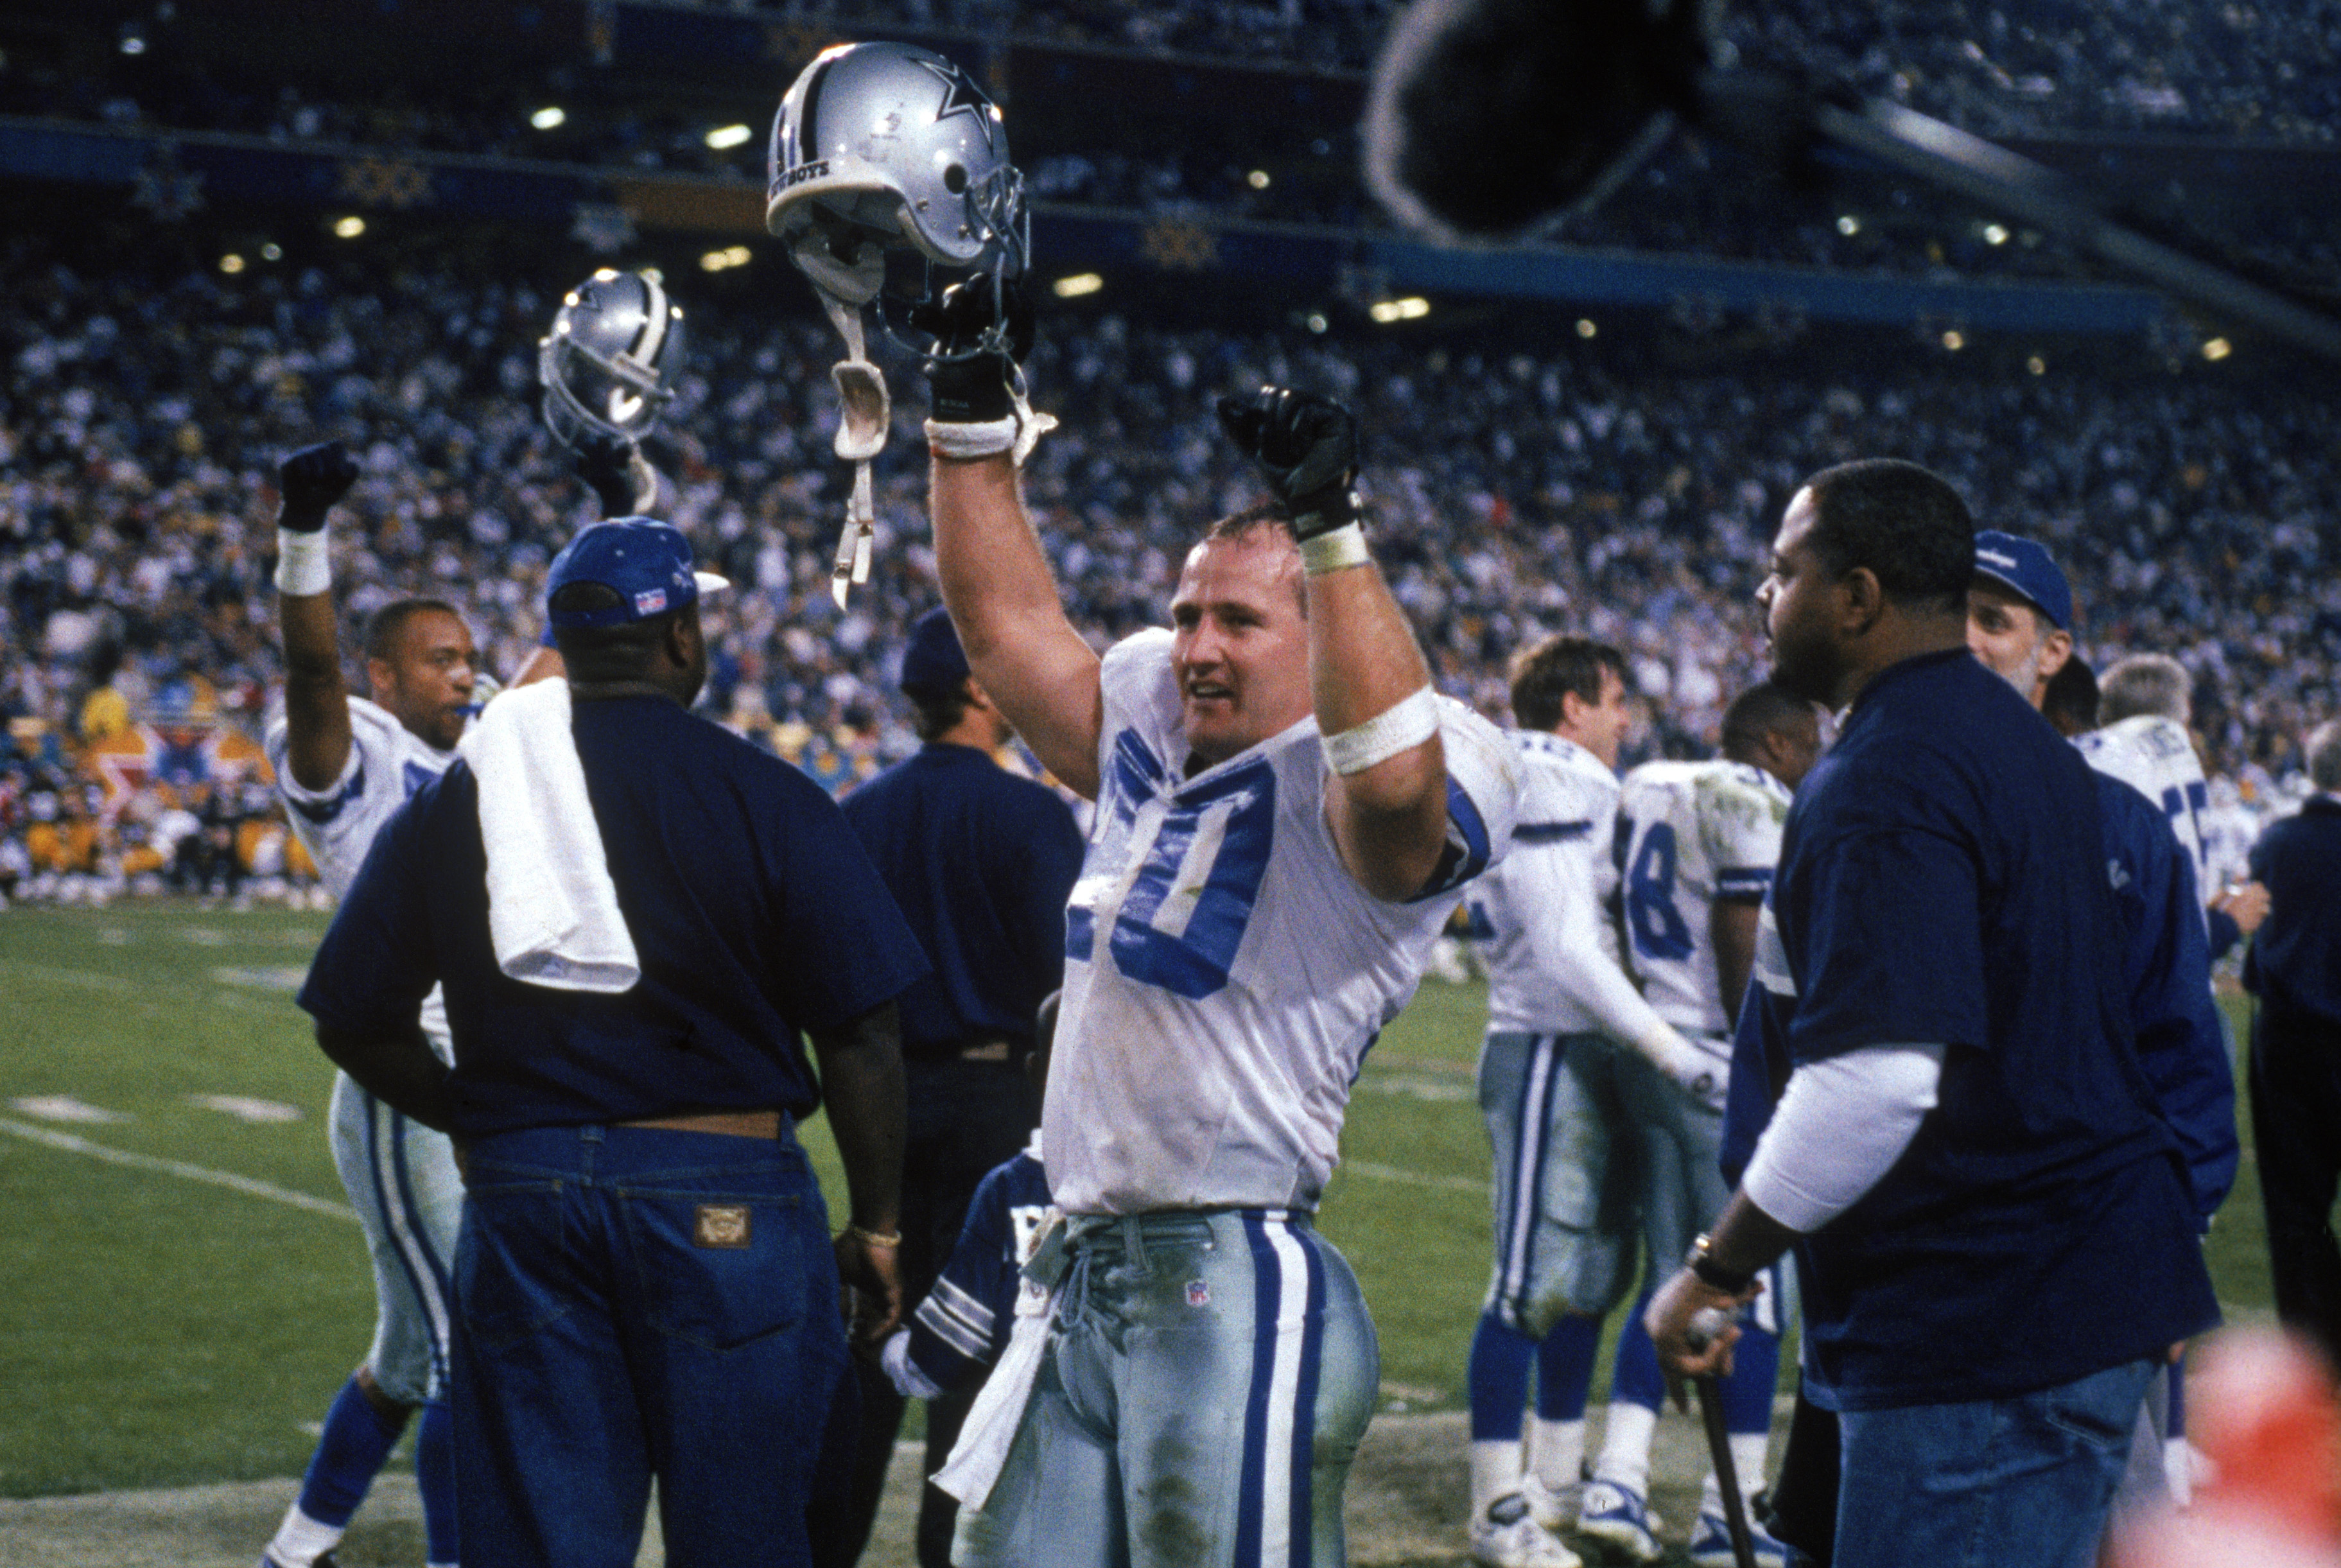 TEMPE, AZ - JANUARY 28:  Safety Bill Bates #40 of the Dallas Cowboys celebrates on the sidelines during Super Bowl XXX against the Pittsburgh Steelers at Sun Devil Stadium on January 28, 1996 in Tempe, Arizona.  The Cowboys won 27-17.  (Photo by George Ro